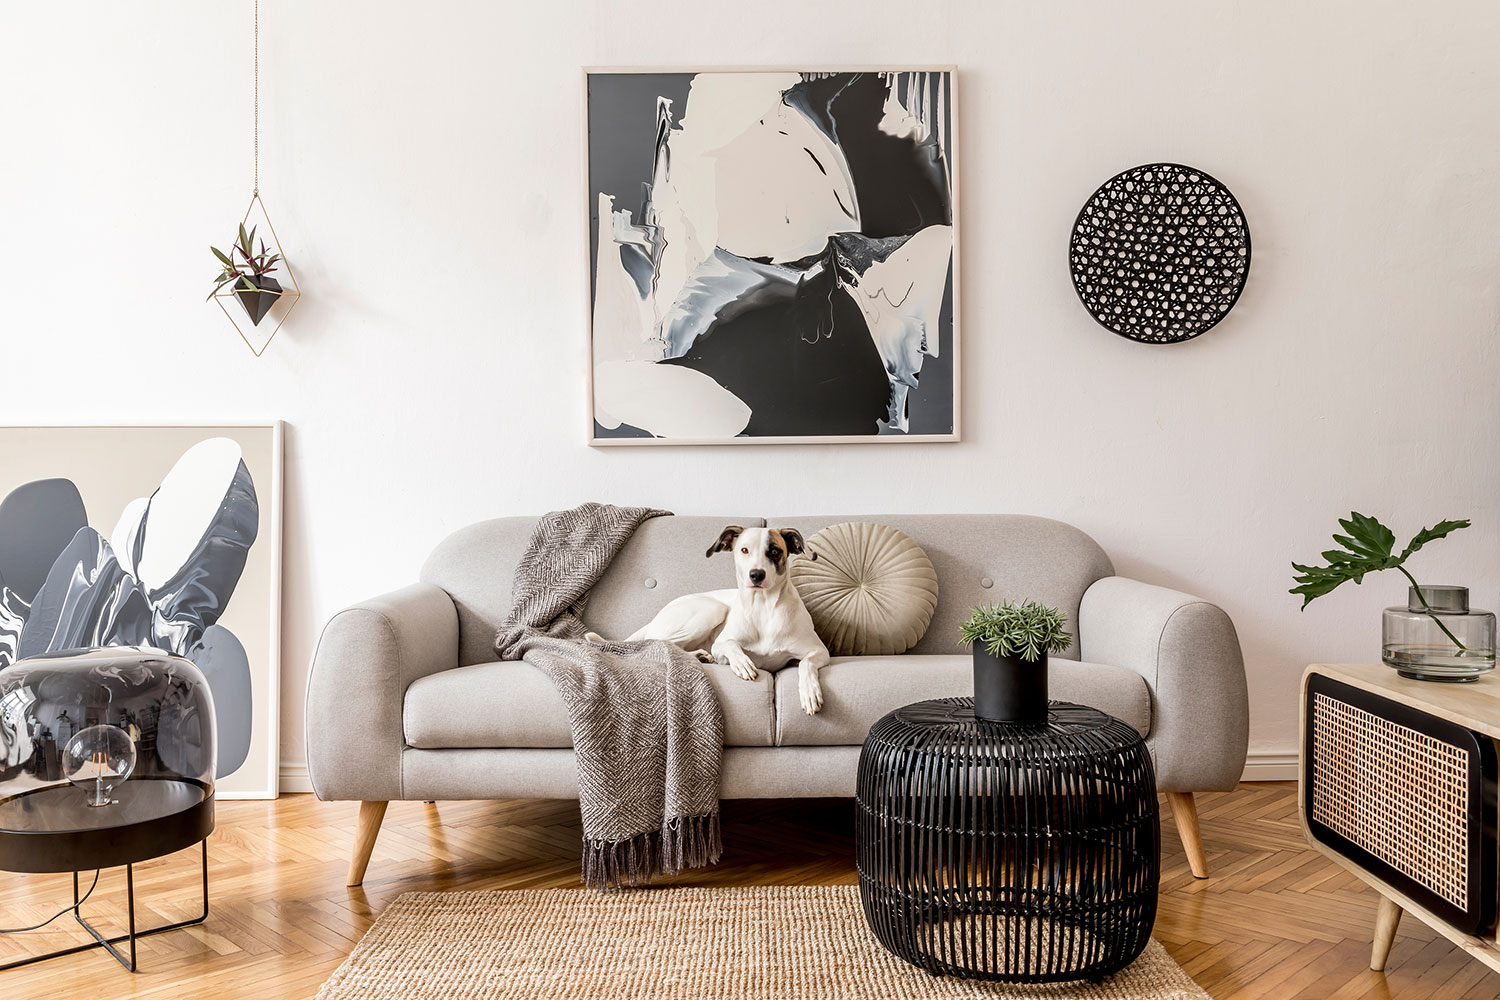 The Art Of Decorating Walls: How To Hang Wall Decor Like A Pro